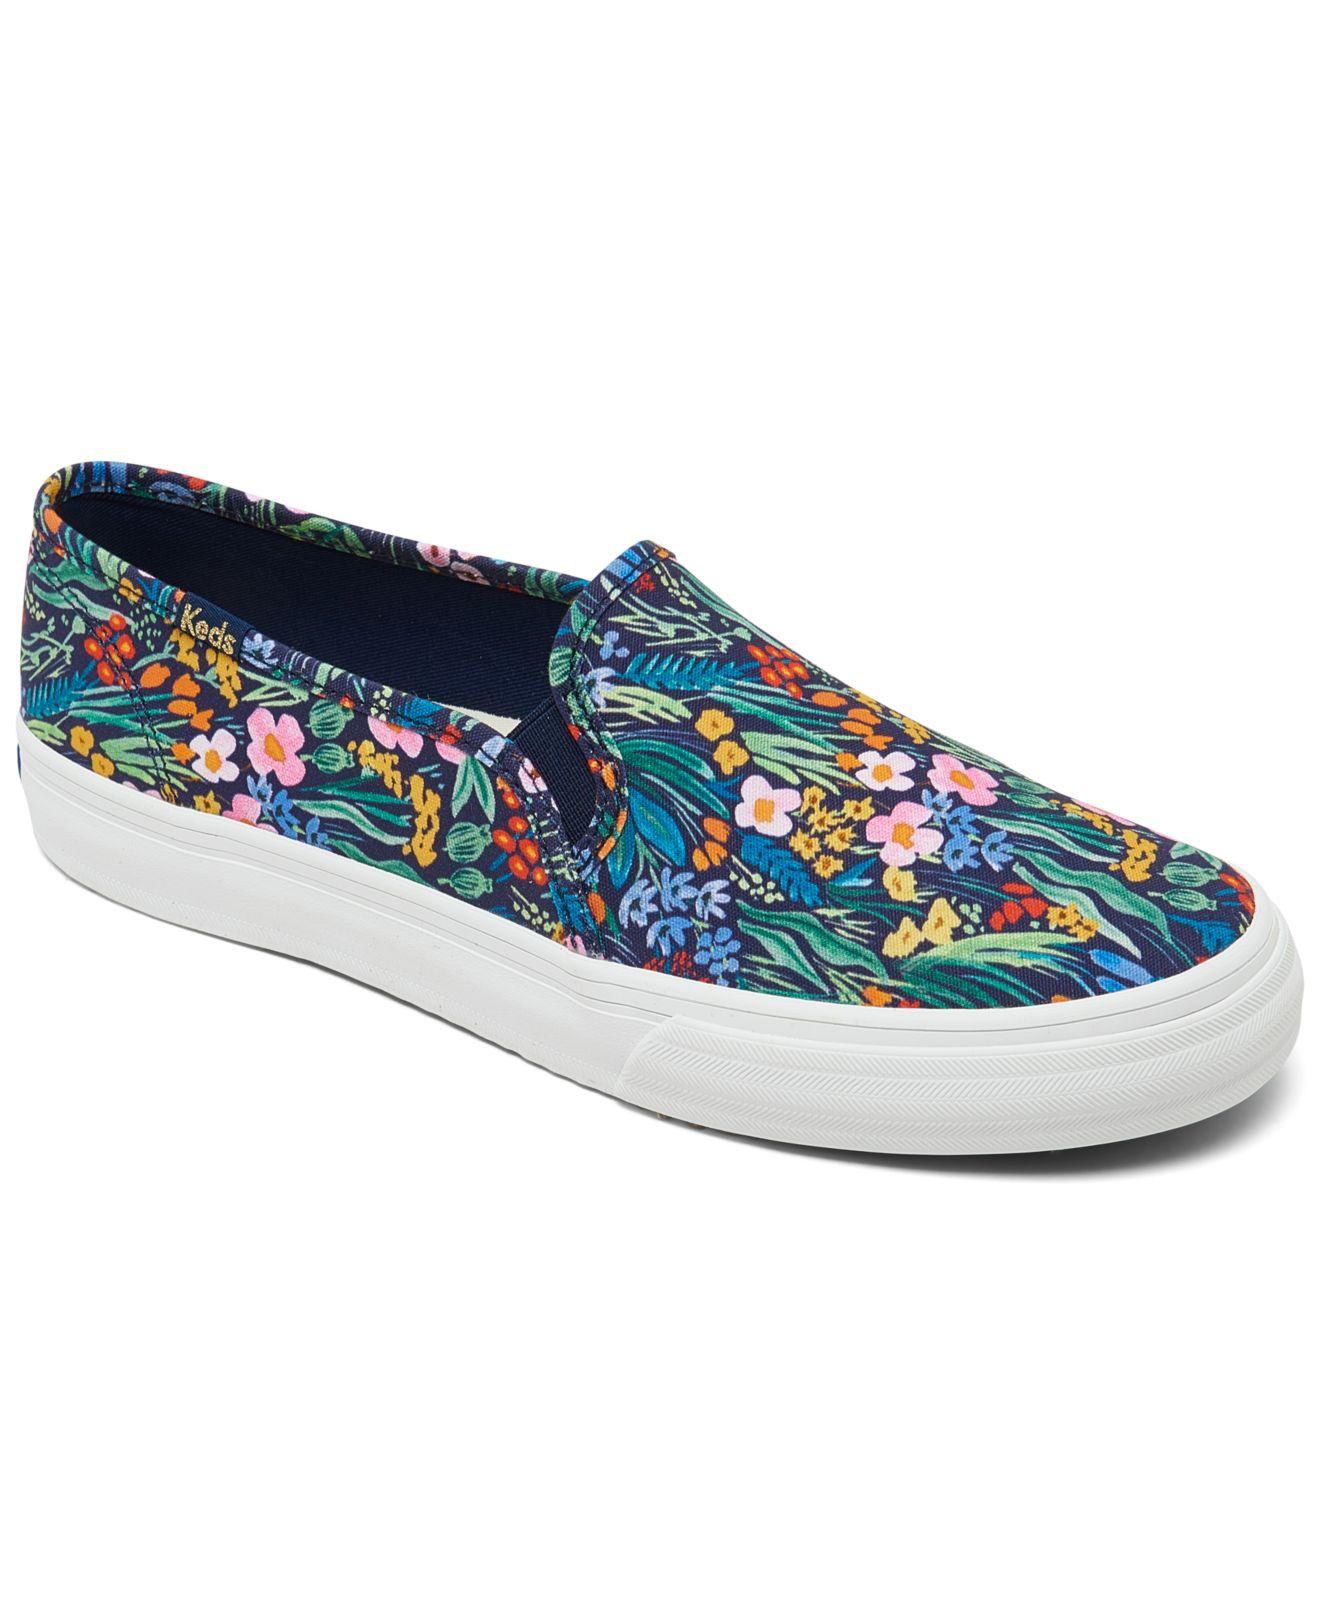 Keds X Rifle Paper Co. Double Decker Garden Party Canvas Slip-on Casual ...